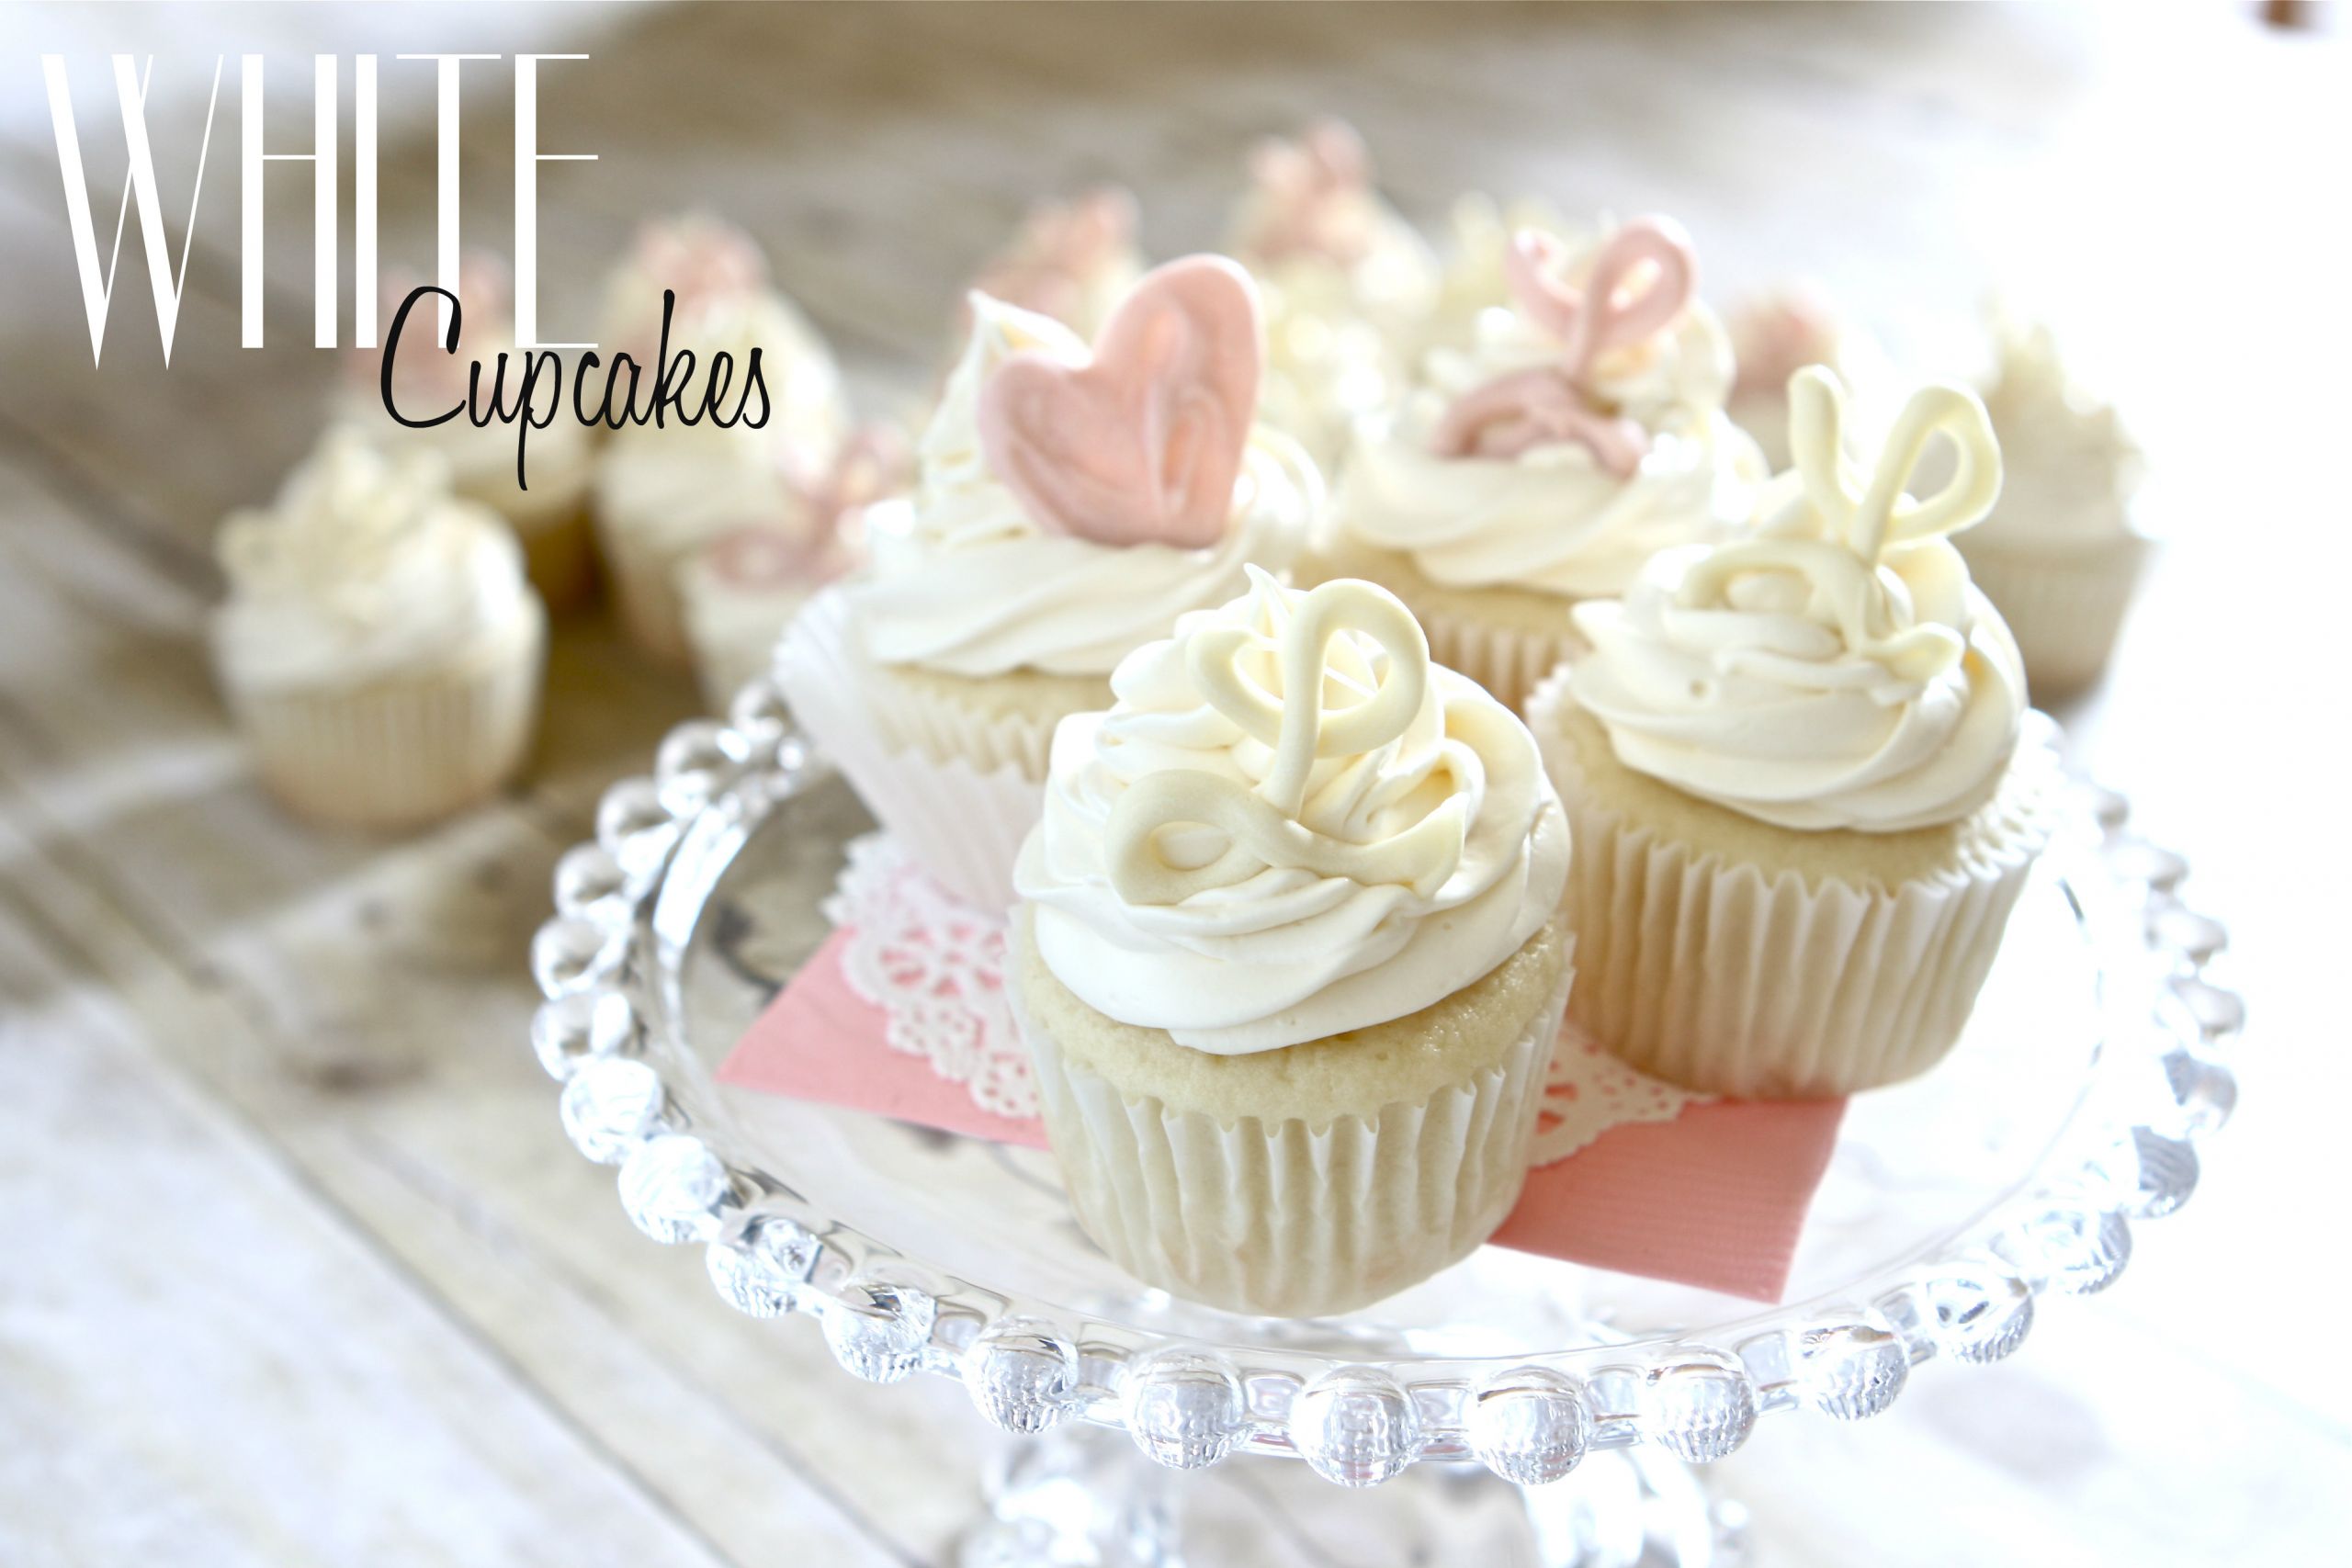 Baby Shower Cupcakes Recipe
 White Cupcakes for a virtual Baby Shower